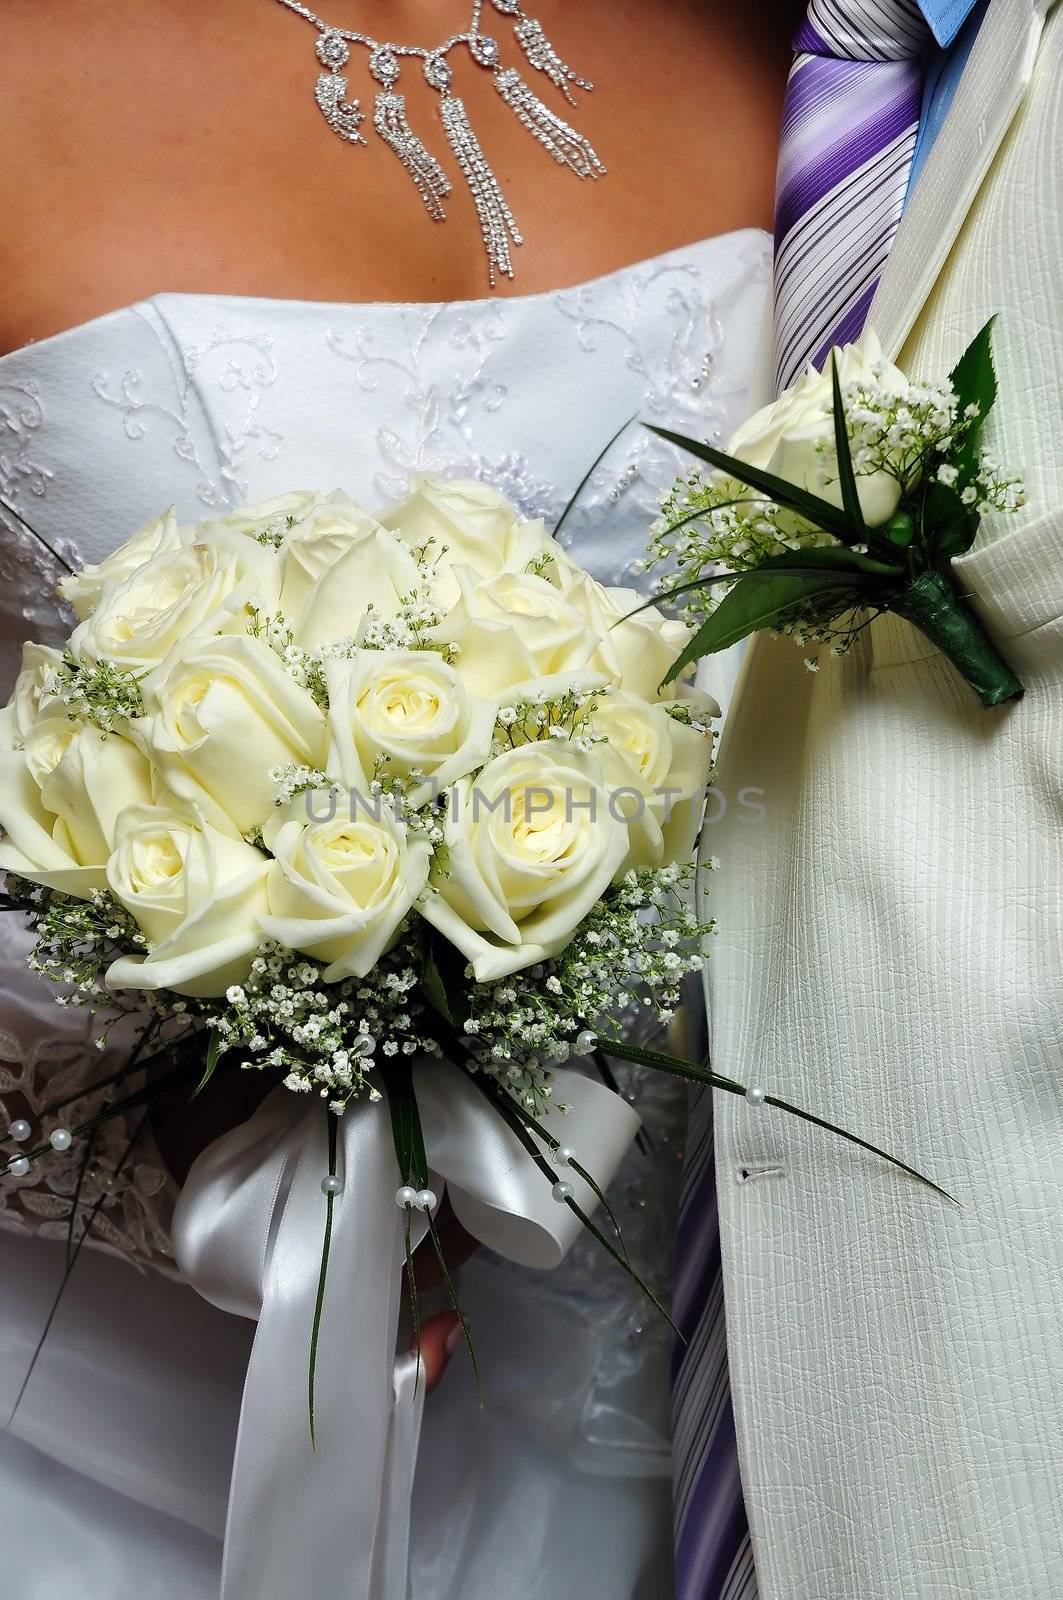 groom's boutonniere and bride's flowers by Reana